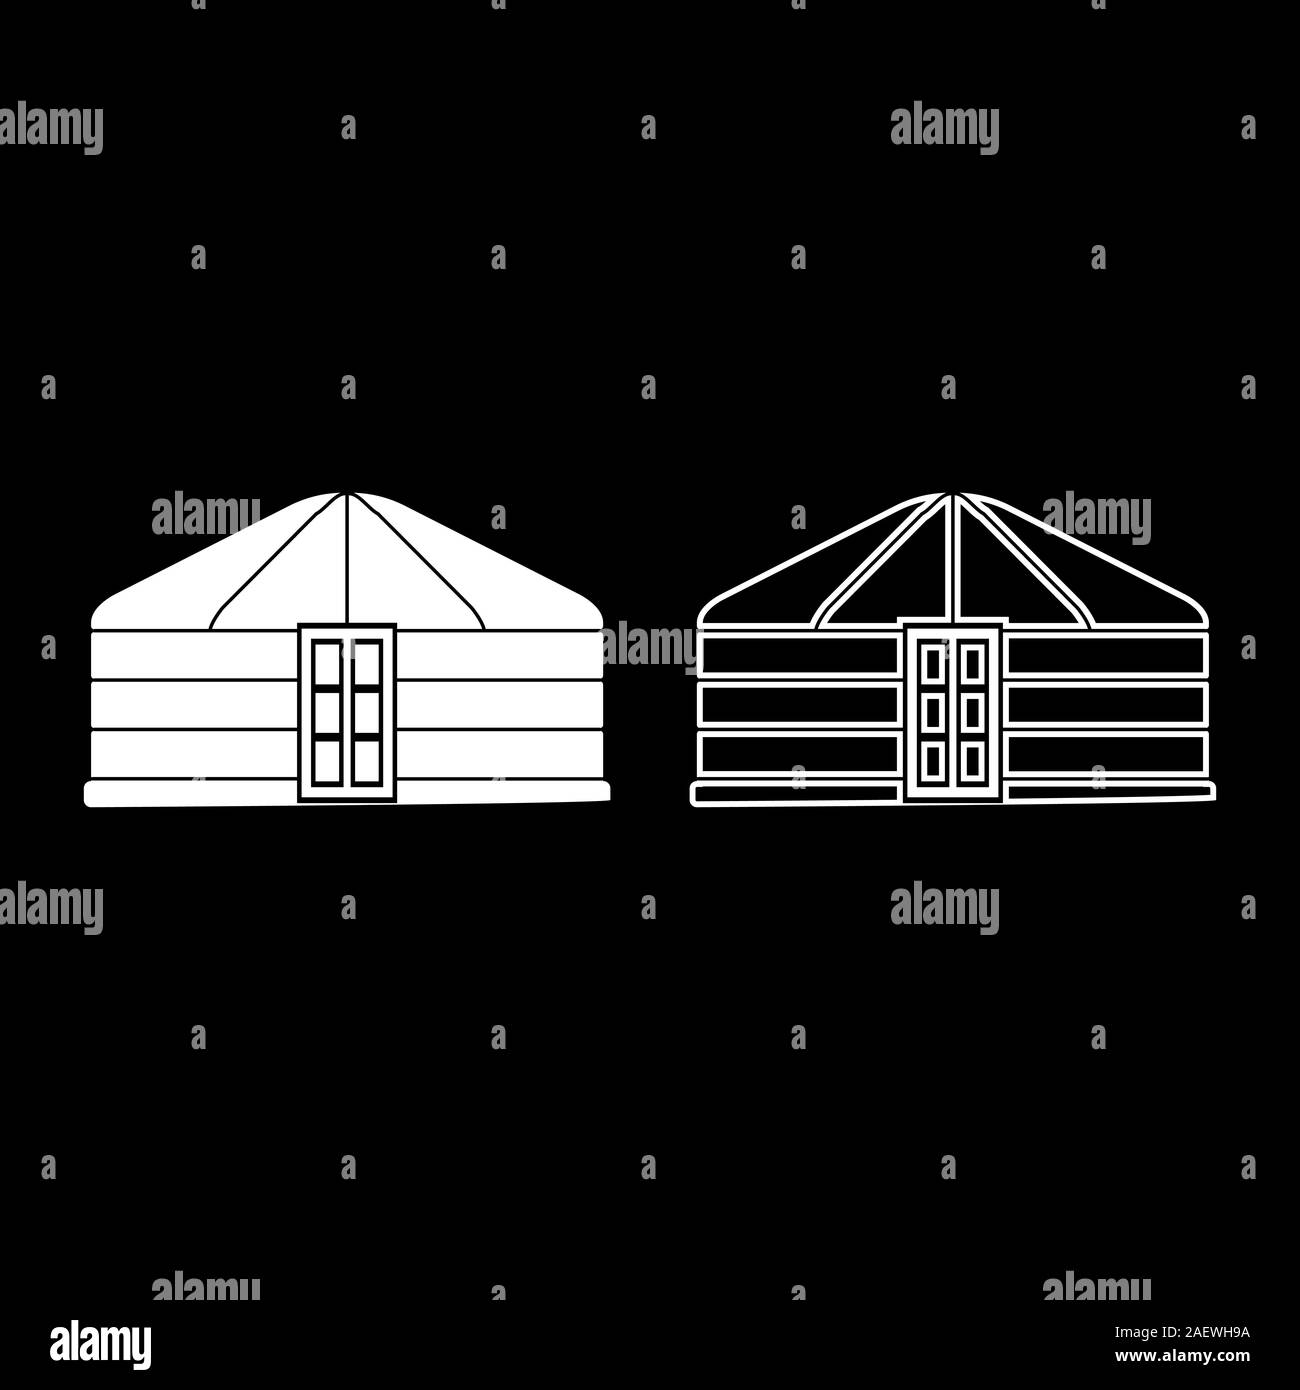 Yurt of nomads Portable frame dwelling with door Mongolian tent covering building icon outline set white color vector illustration flat style simple Stock Vector